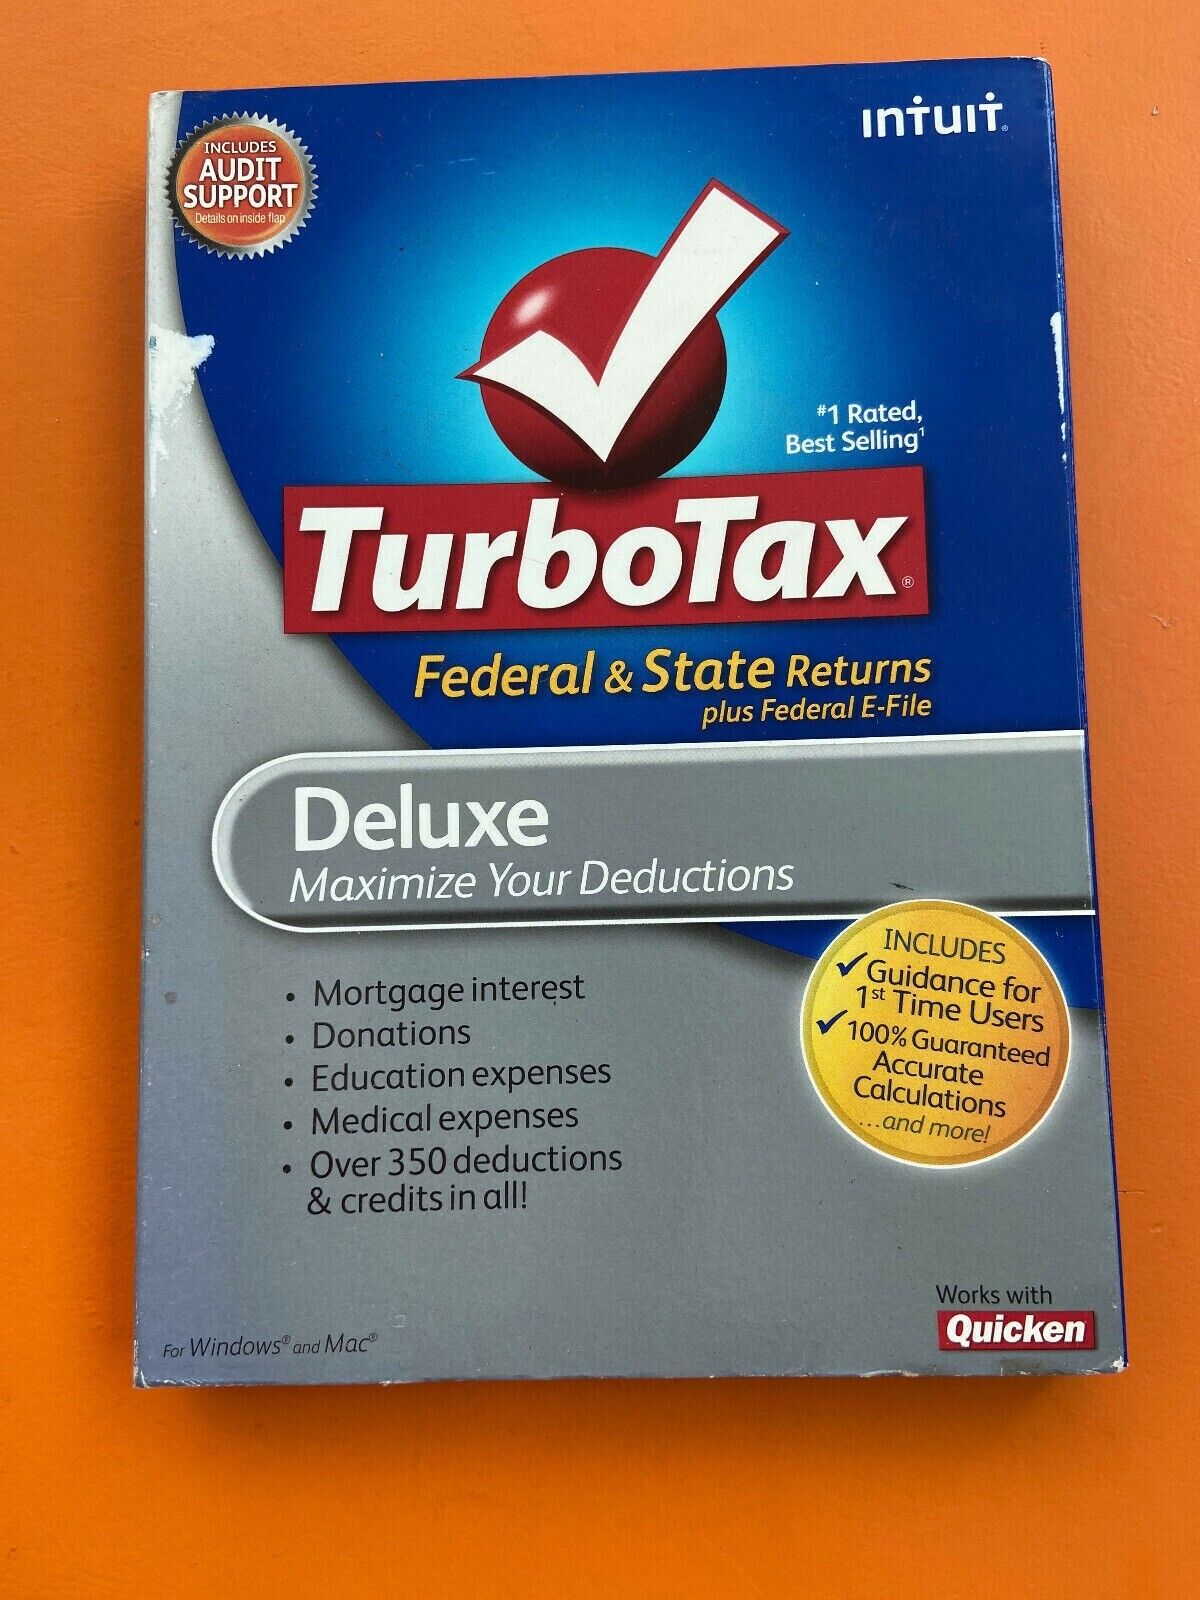 TurboTax Deluxe For Tax Year 2010 Federal and State Includes Federal E-File